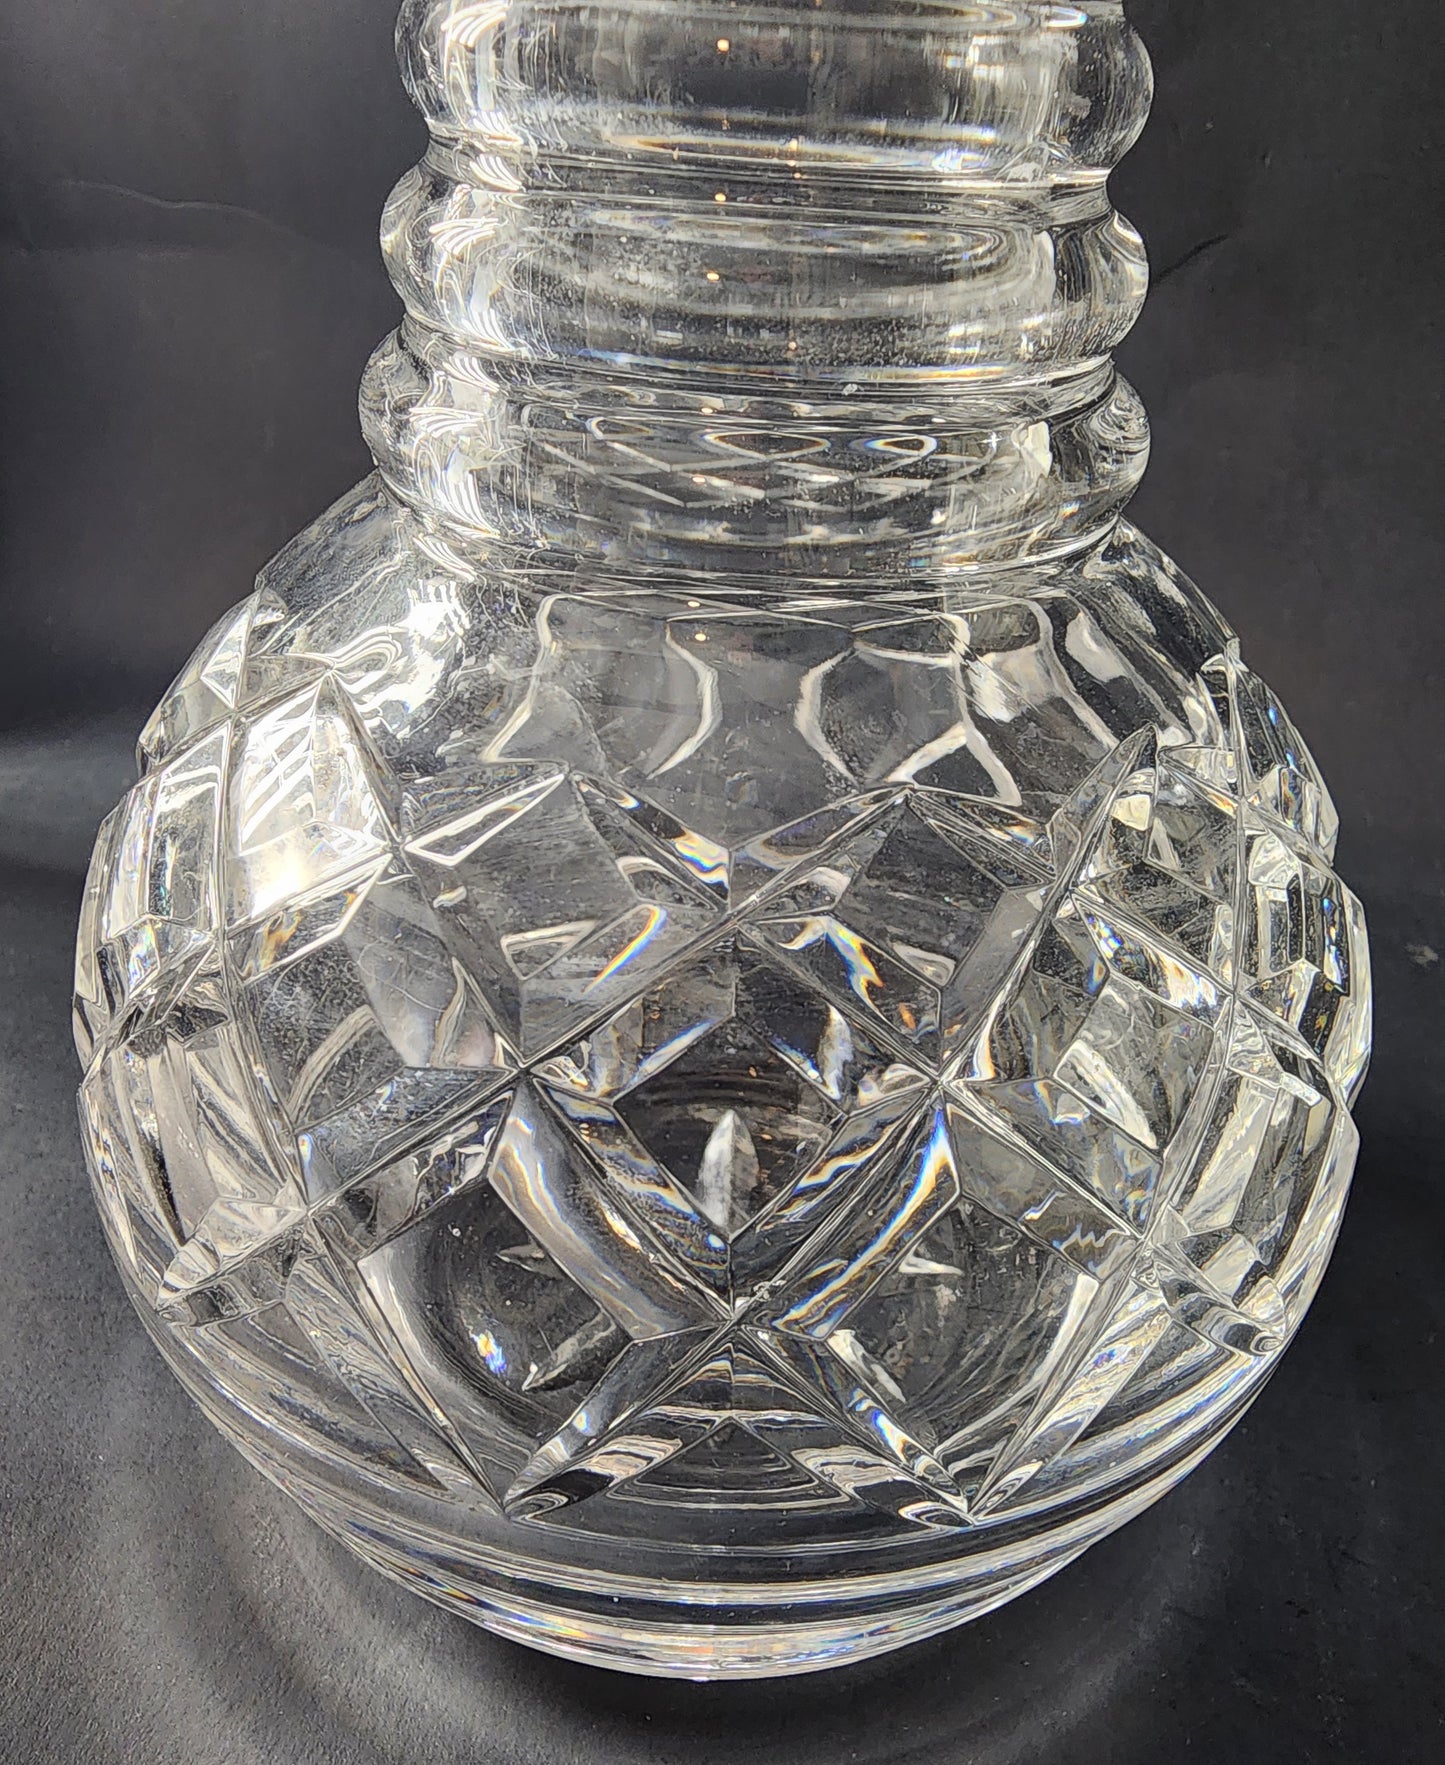 Signed Waterford glass carafe